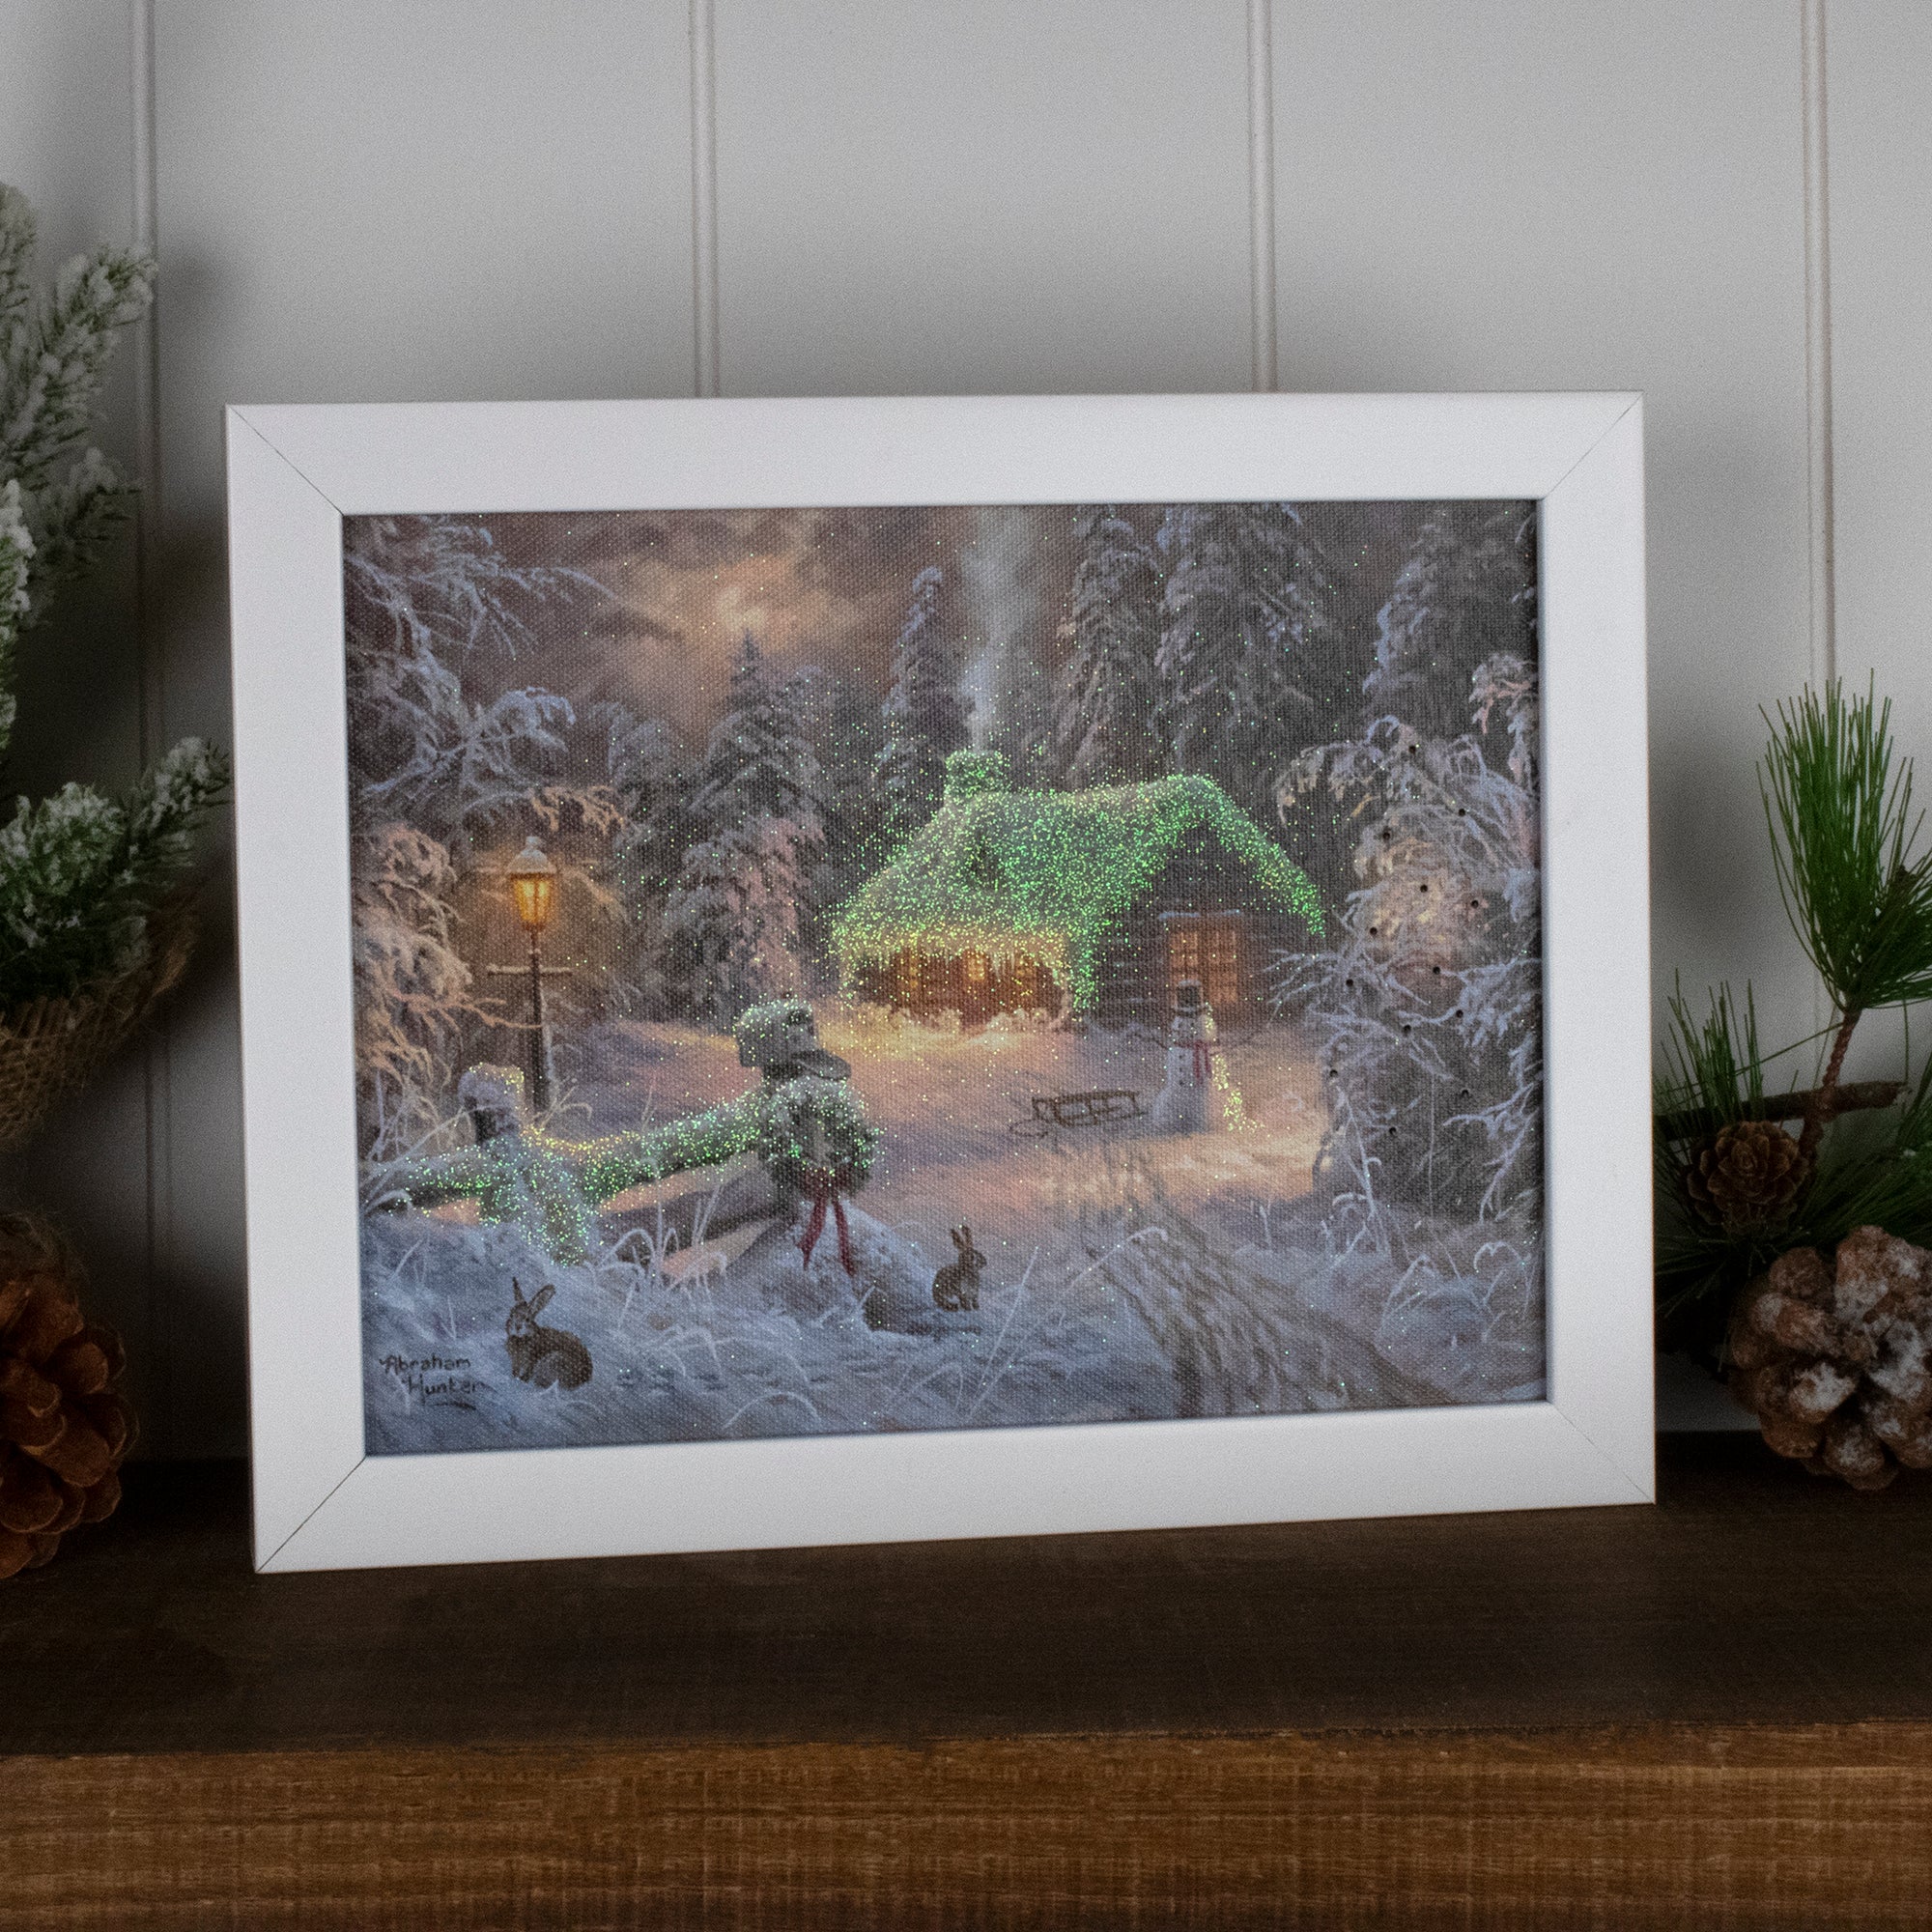 Holiday Home Lighted Shadow Box